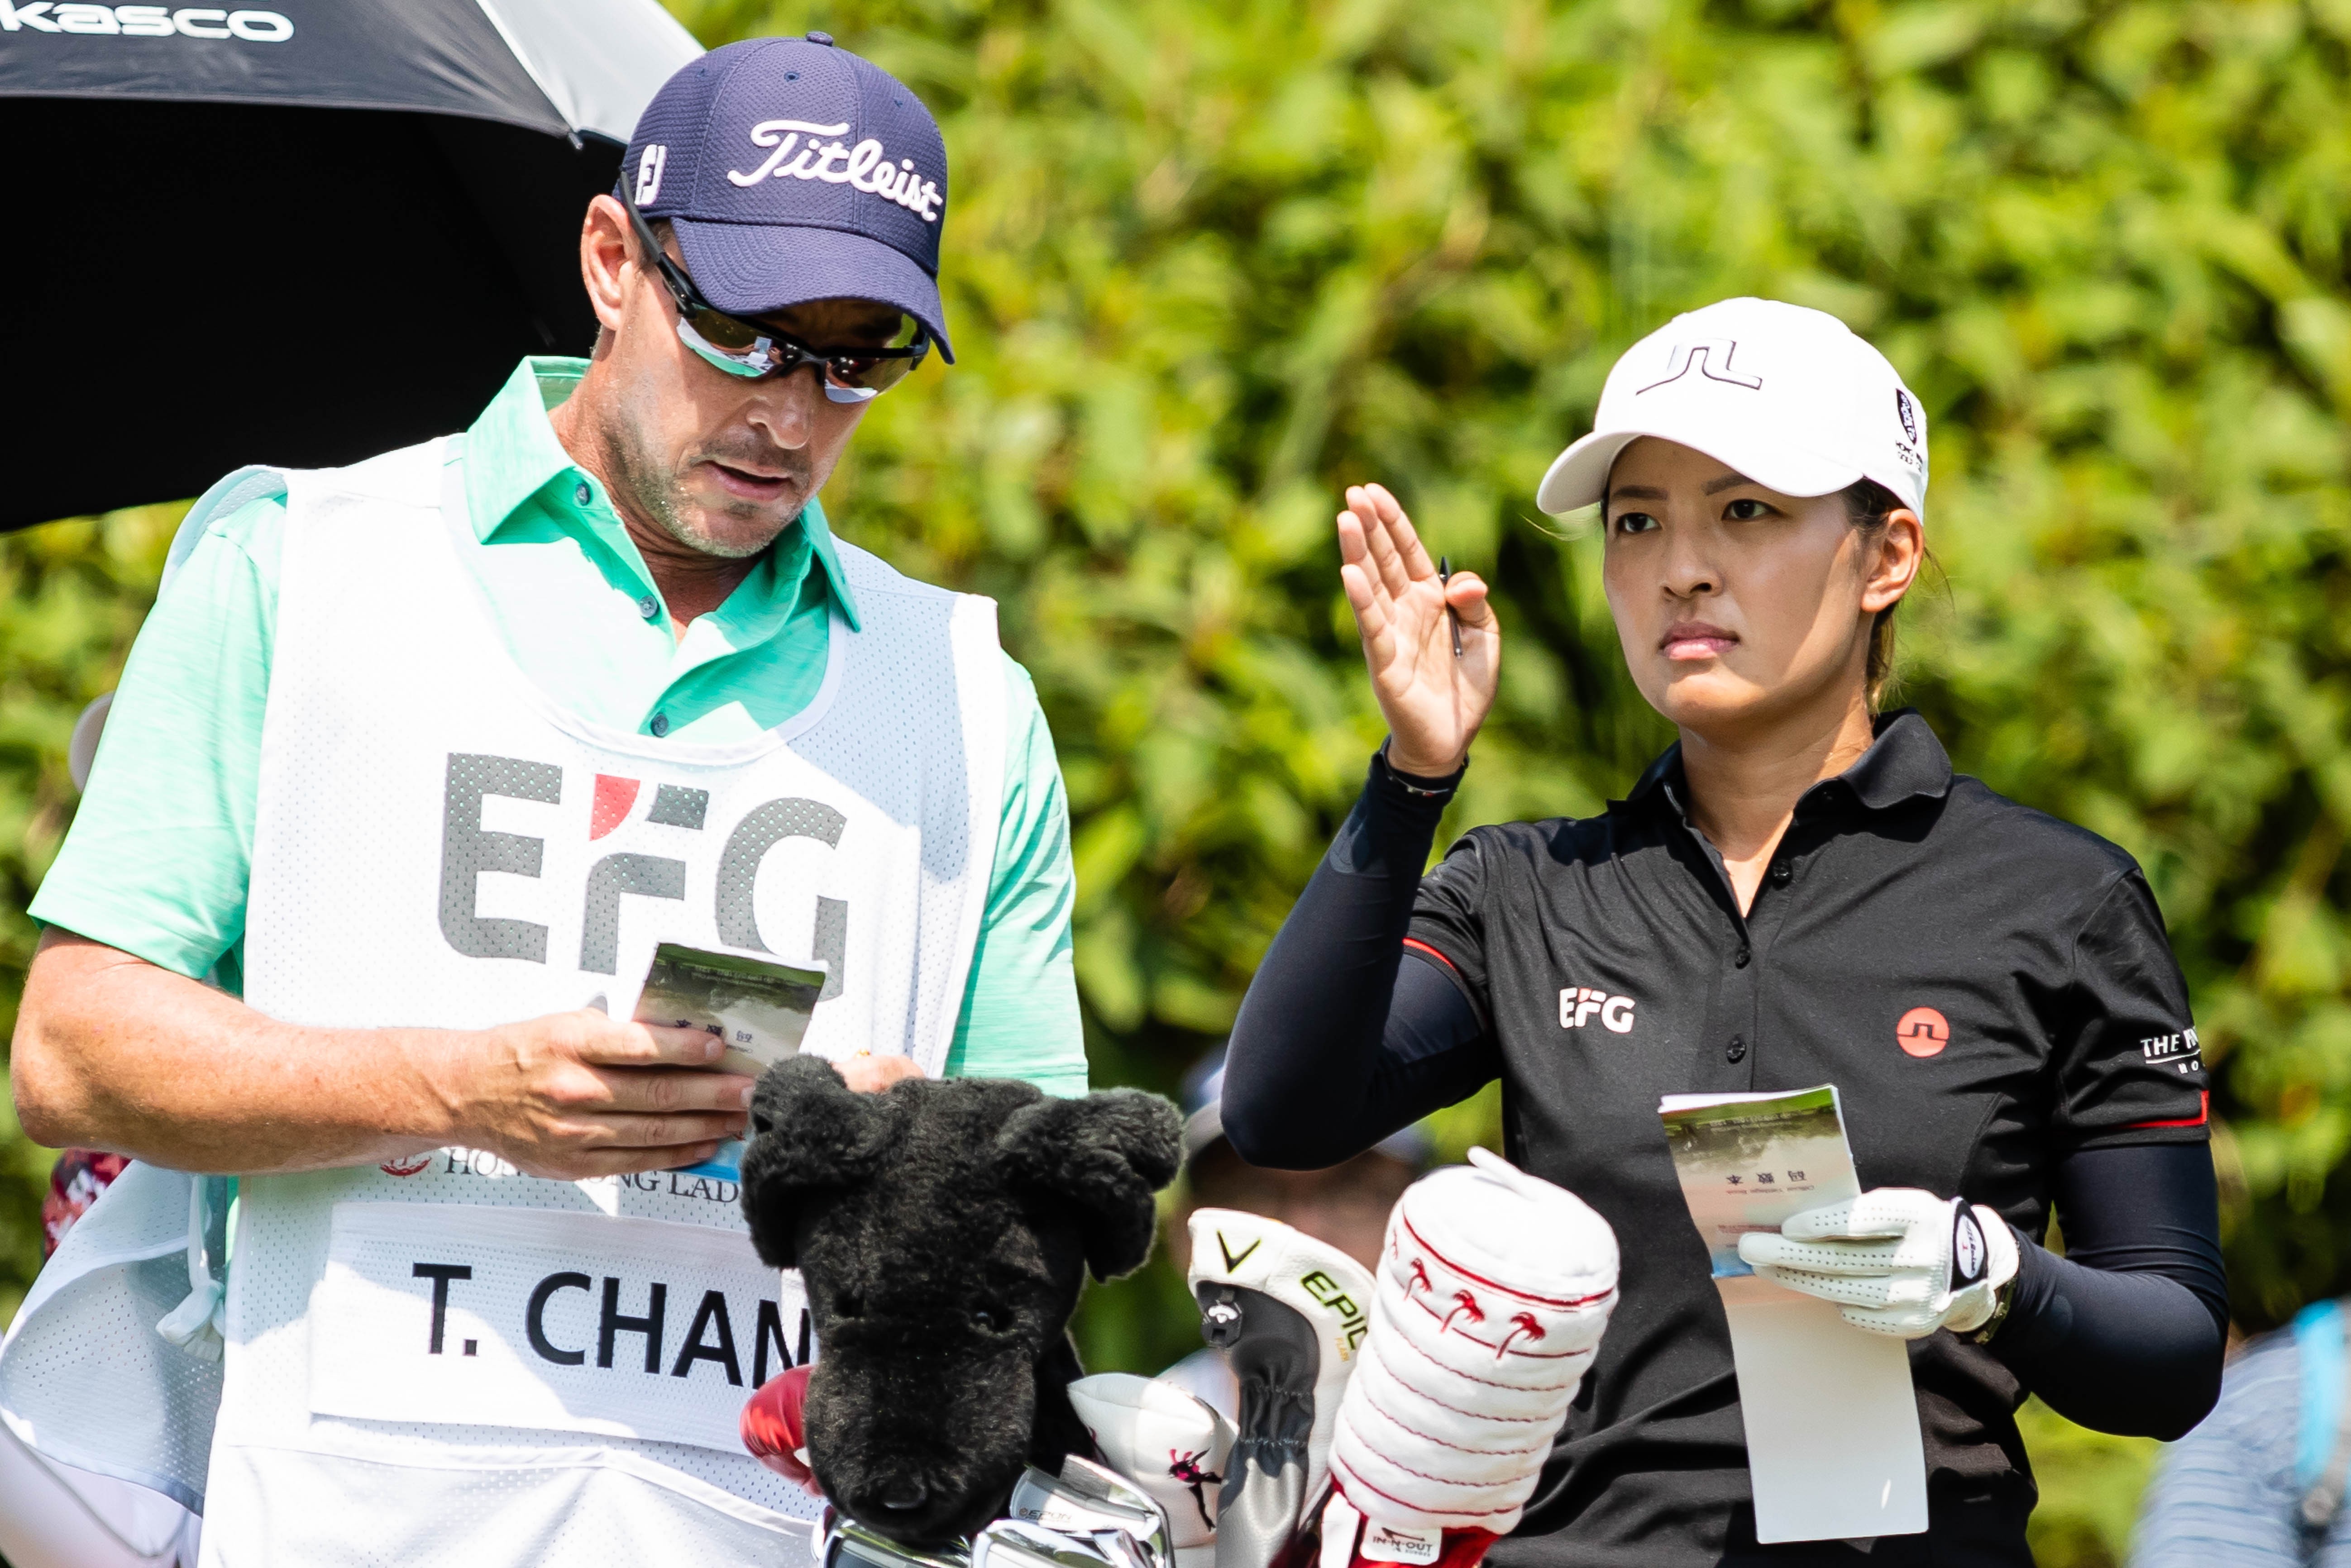 Tiffany Chan is back in contention going into the final round of the Thornberry Classic in Wisconsin. Photo: Yu Chun Christopher Wong/Eurasia Sport Images